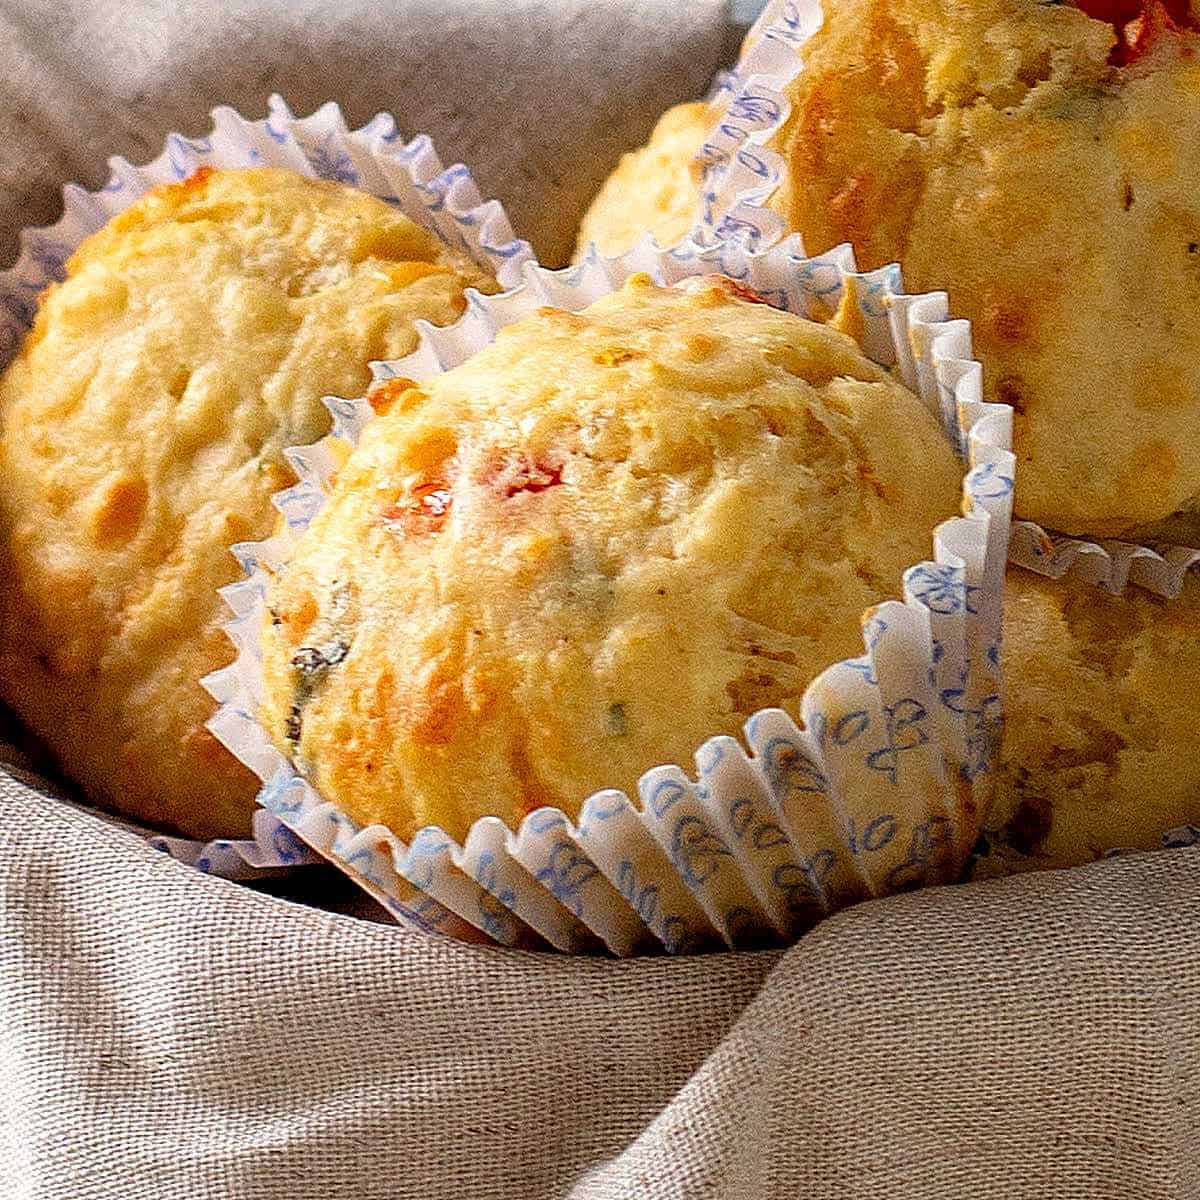 The Absolute Best Ways To Keep Muffins Fresh